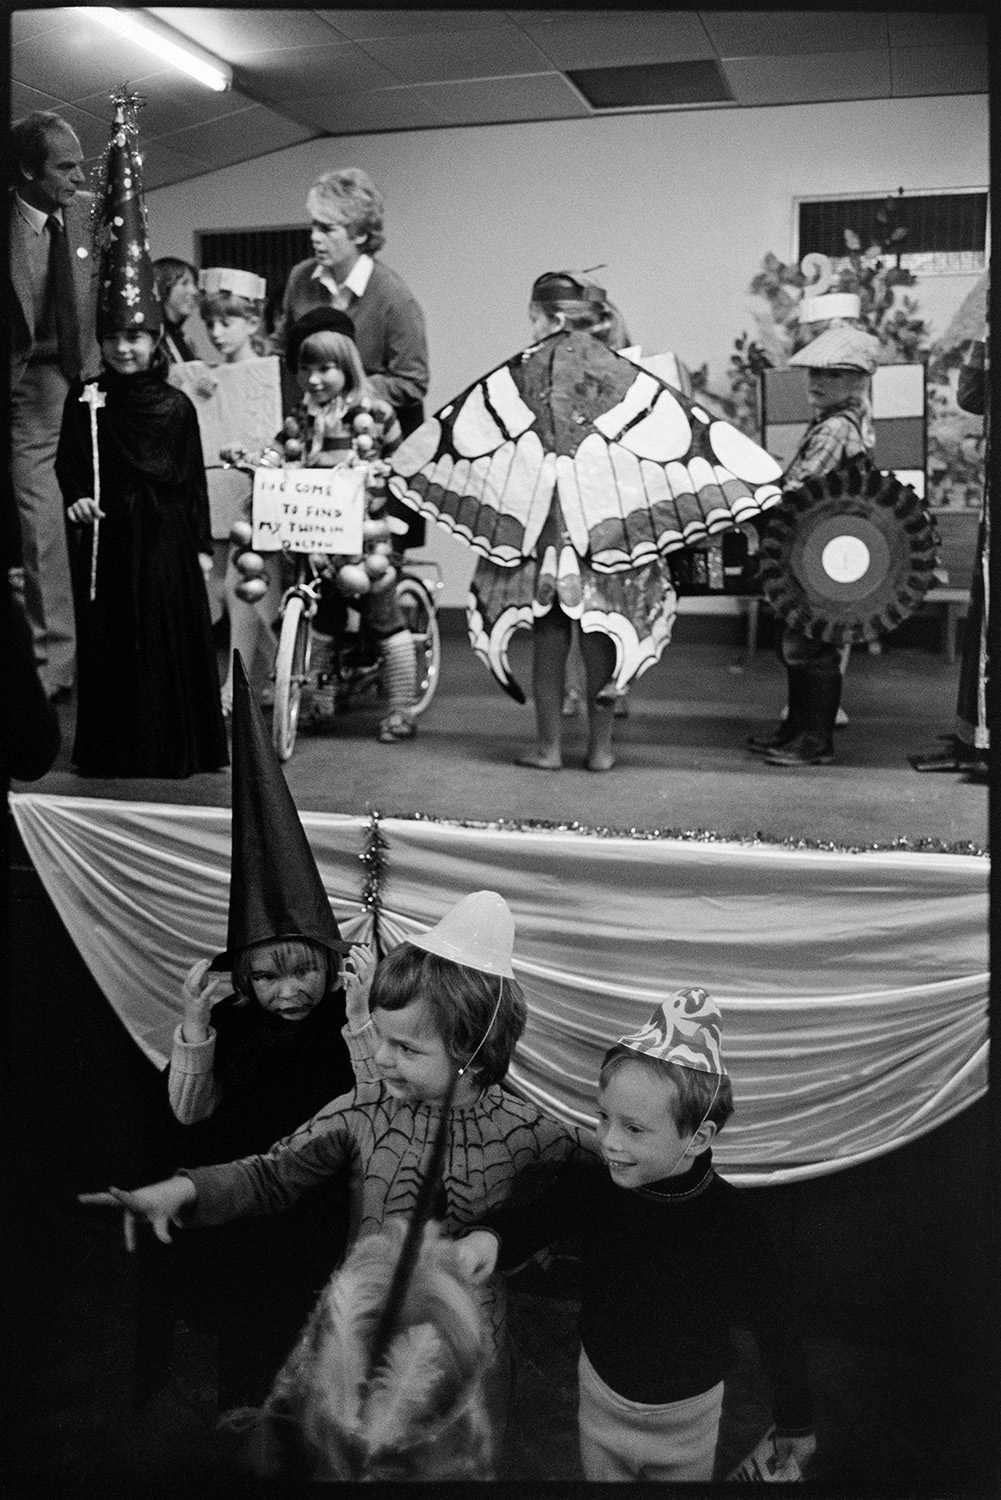 Fancy dress competition in village hall, spectators, queen and crown on cushion. 
[Children taking part in a fancy dress competition for Dolton Carnival in Dolton Village Hall. Costumes include a butterfly, a witch or wizard and a child on a bicycle.]